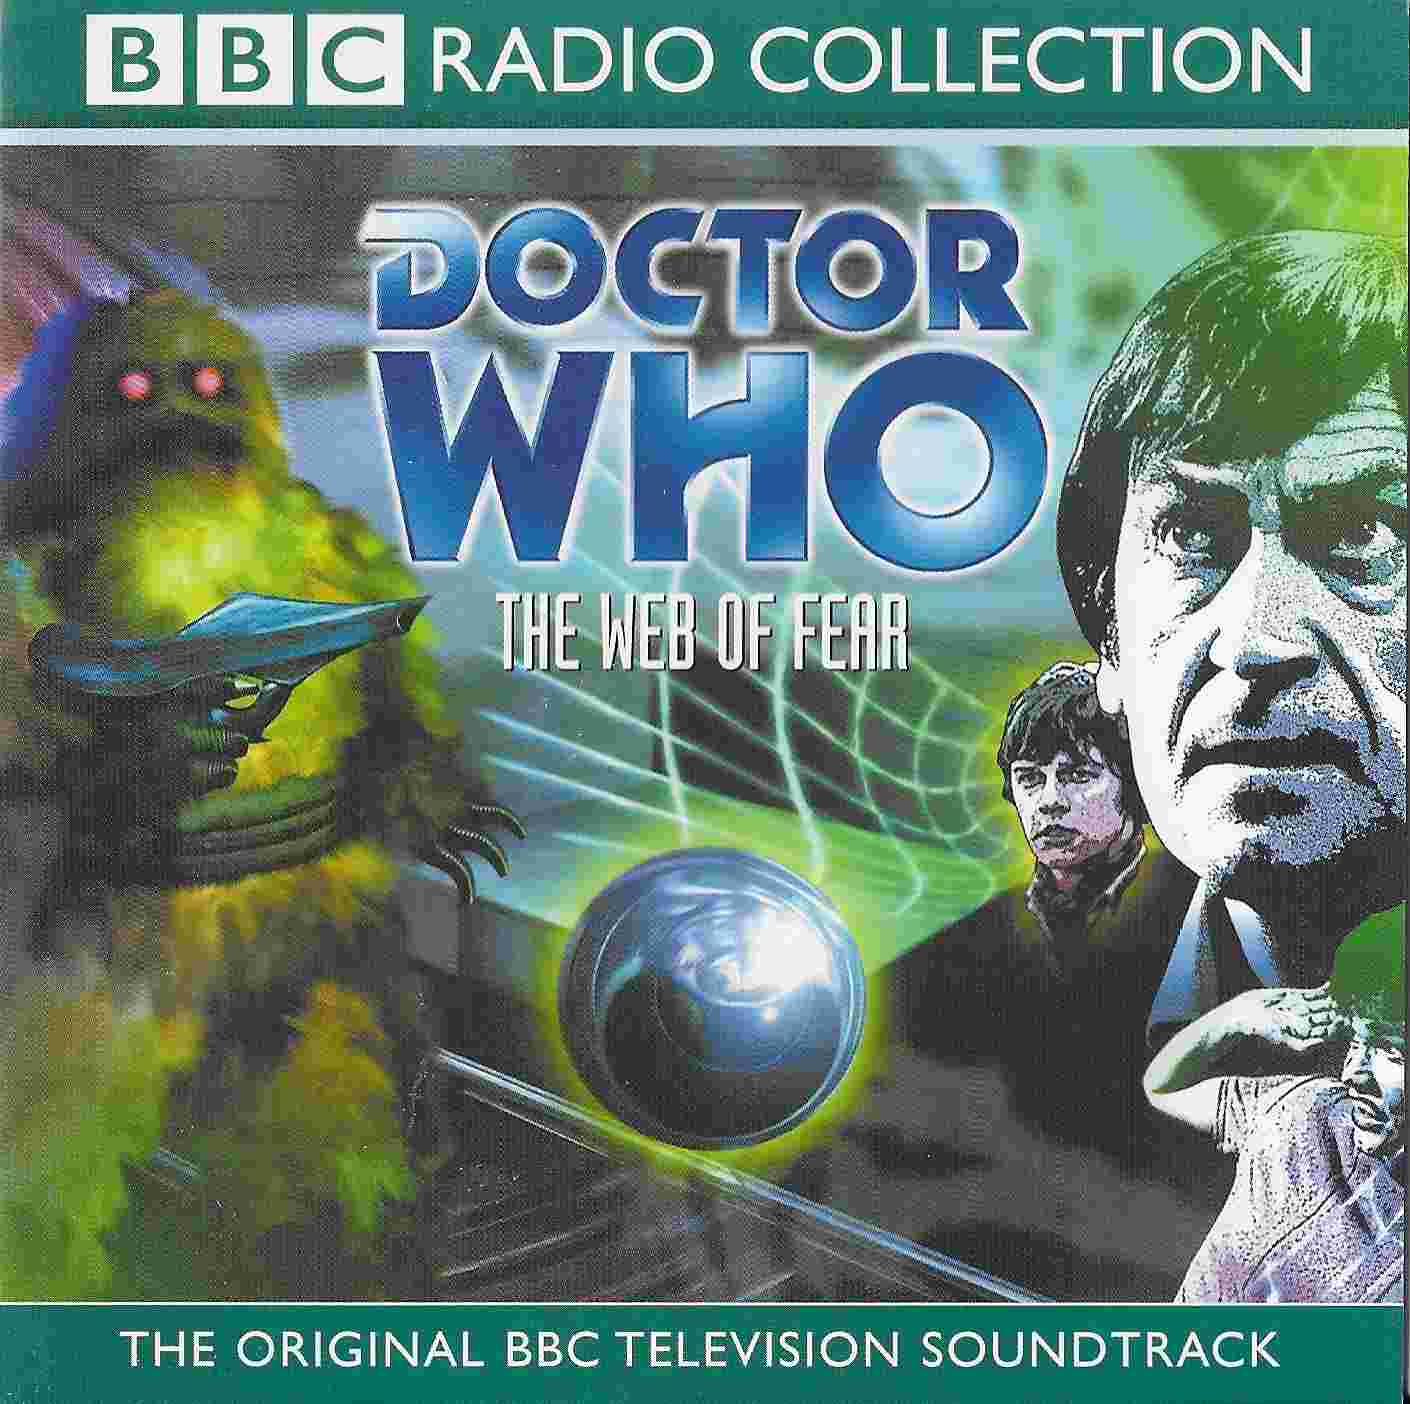 Picture of ISBN 0-563-55382-0 Doctor Who - The web of fear by artist Mervyn Haisman / Henry Lincoln from the BBC records and Tapes library